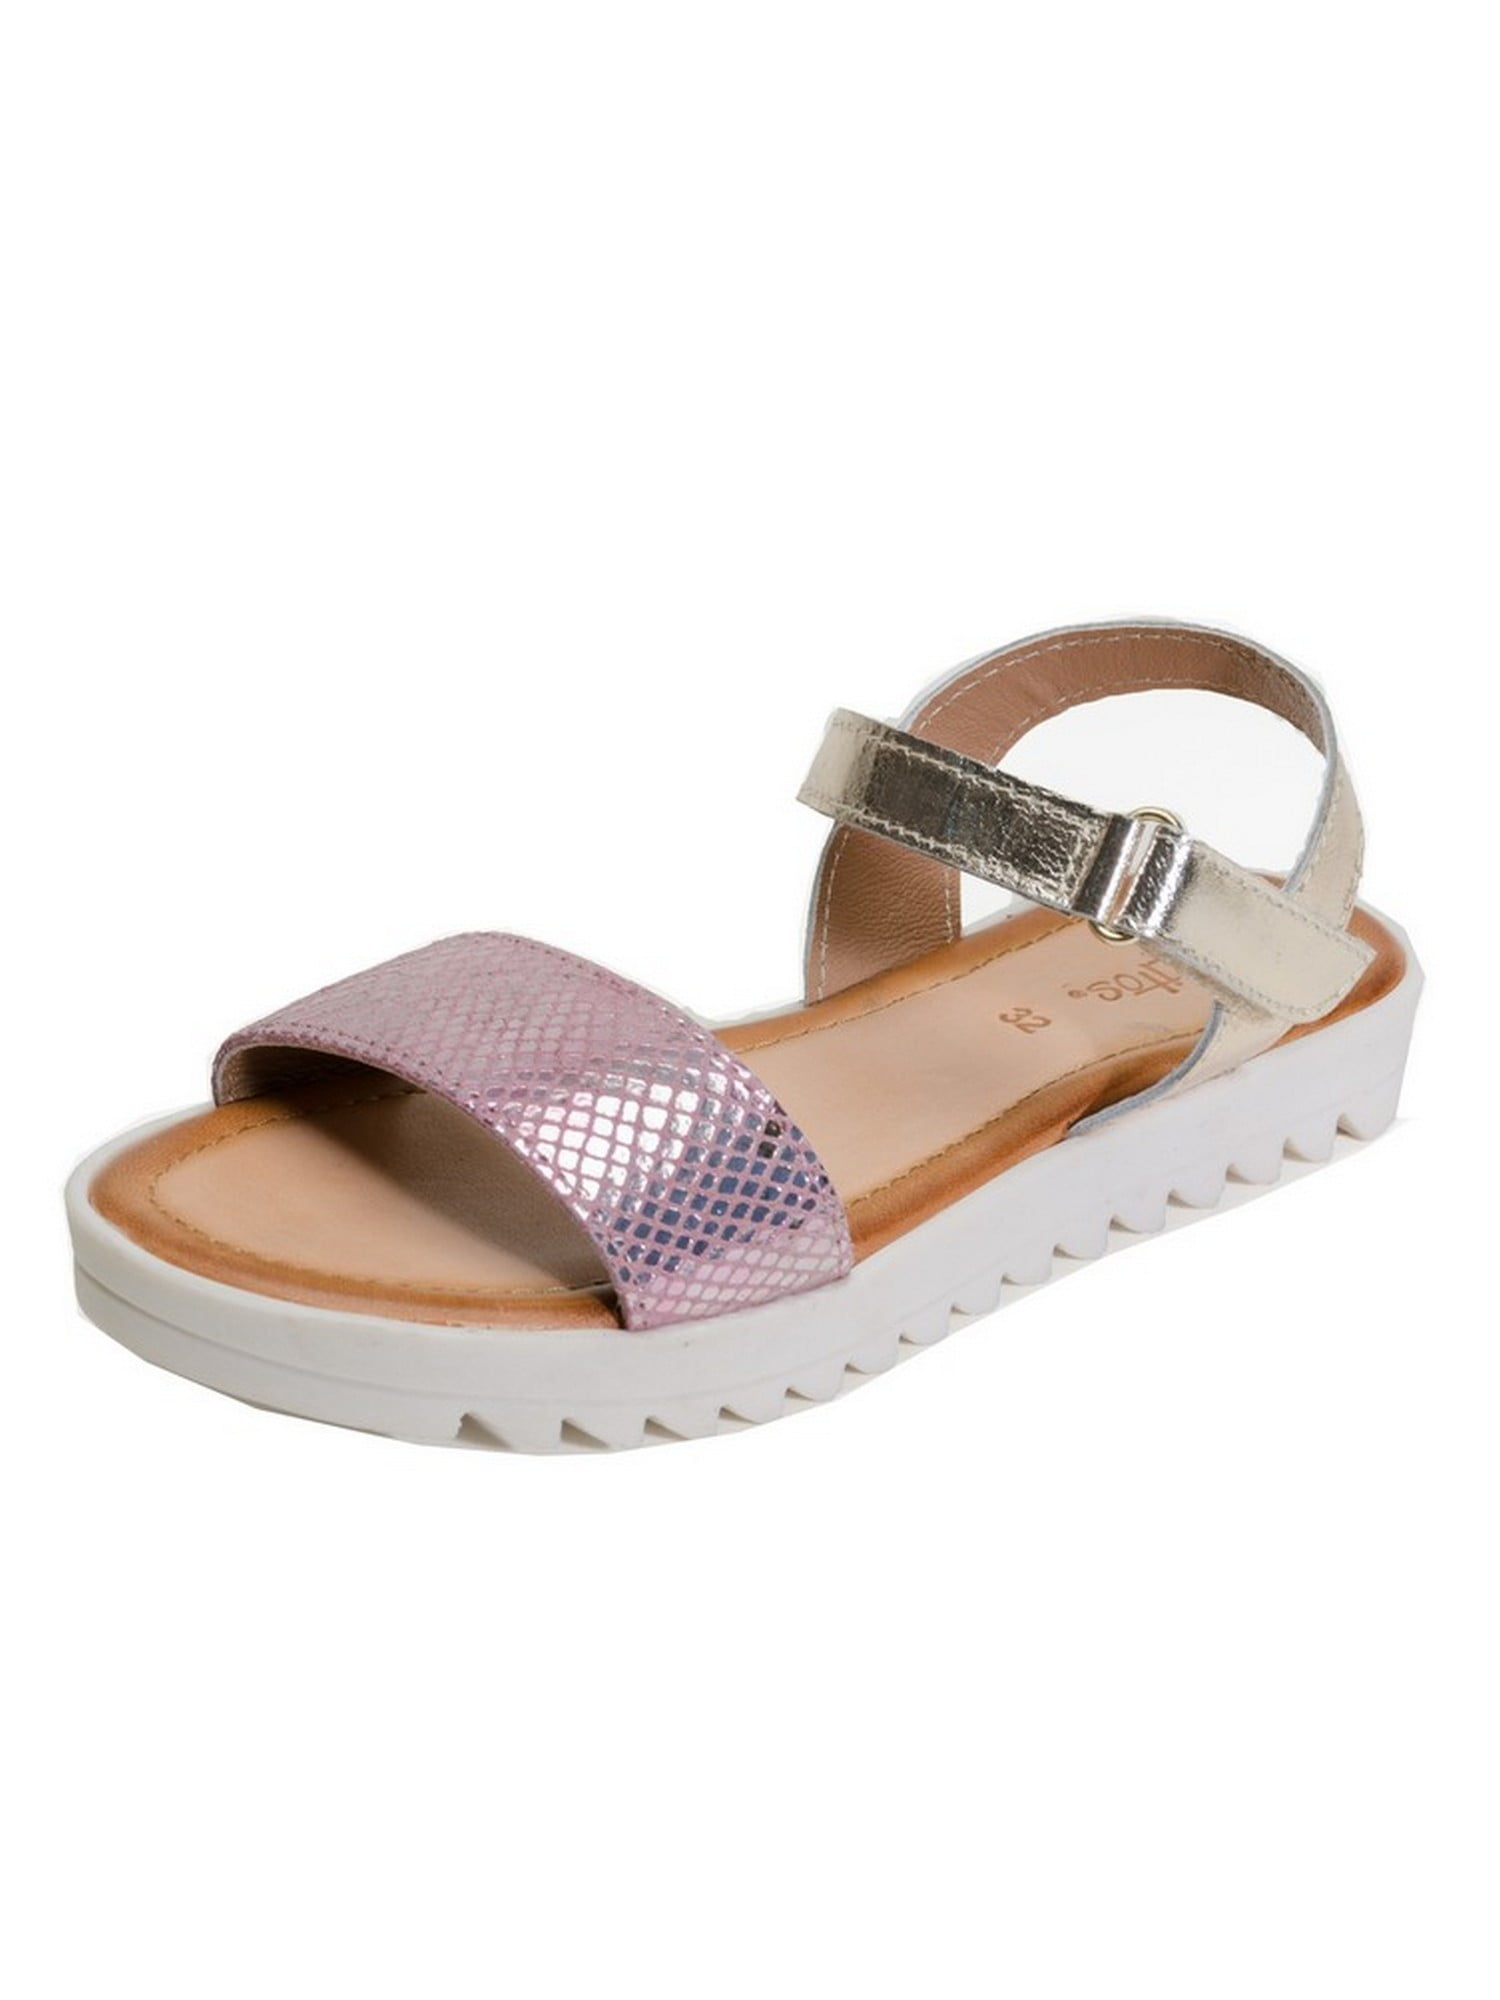 white thick sole sandals